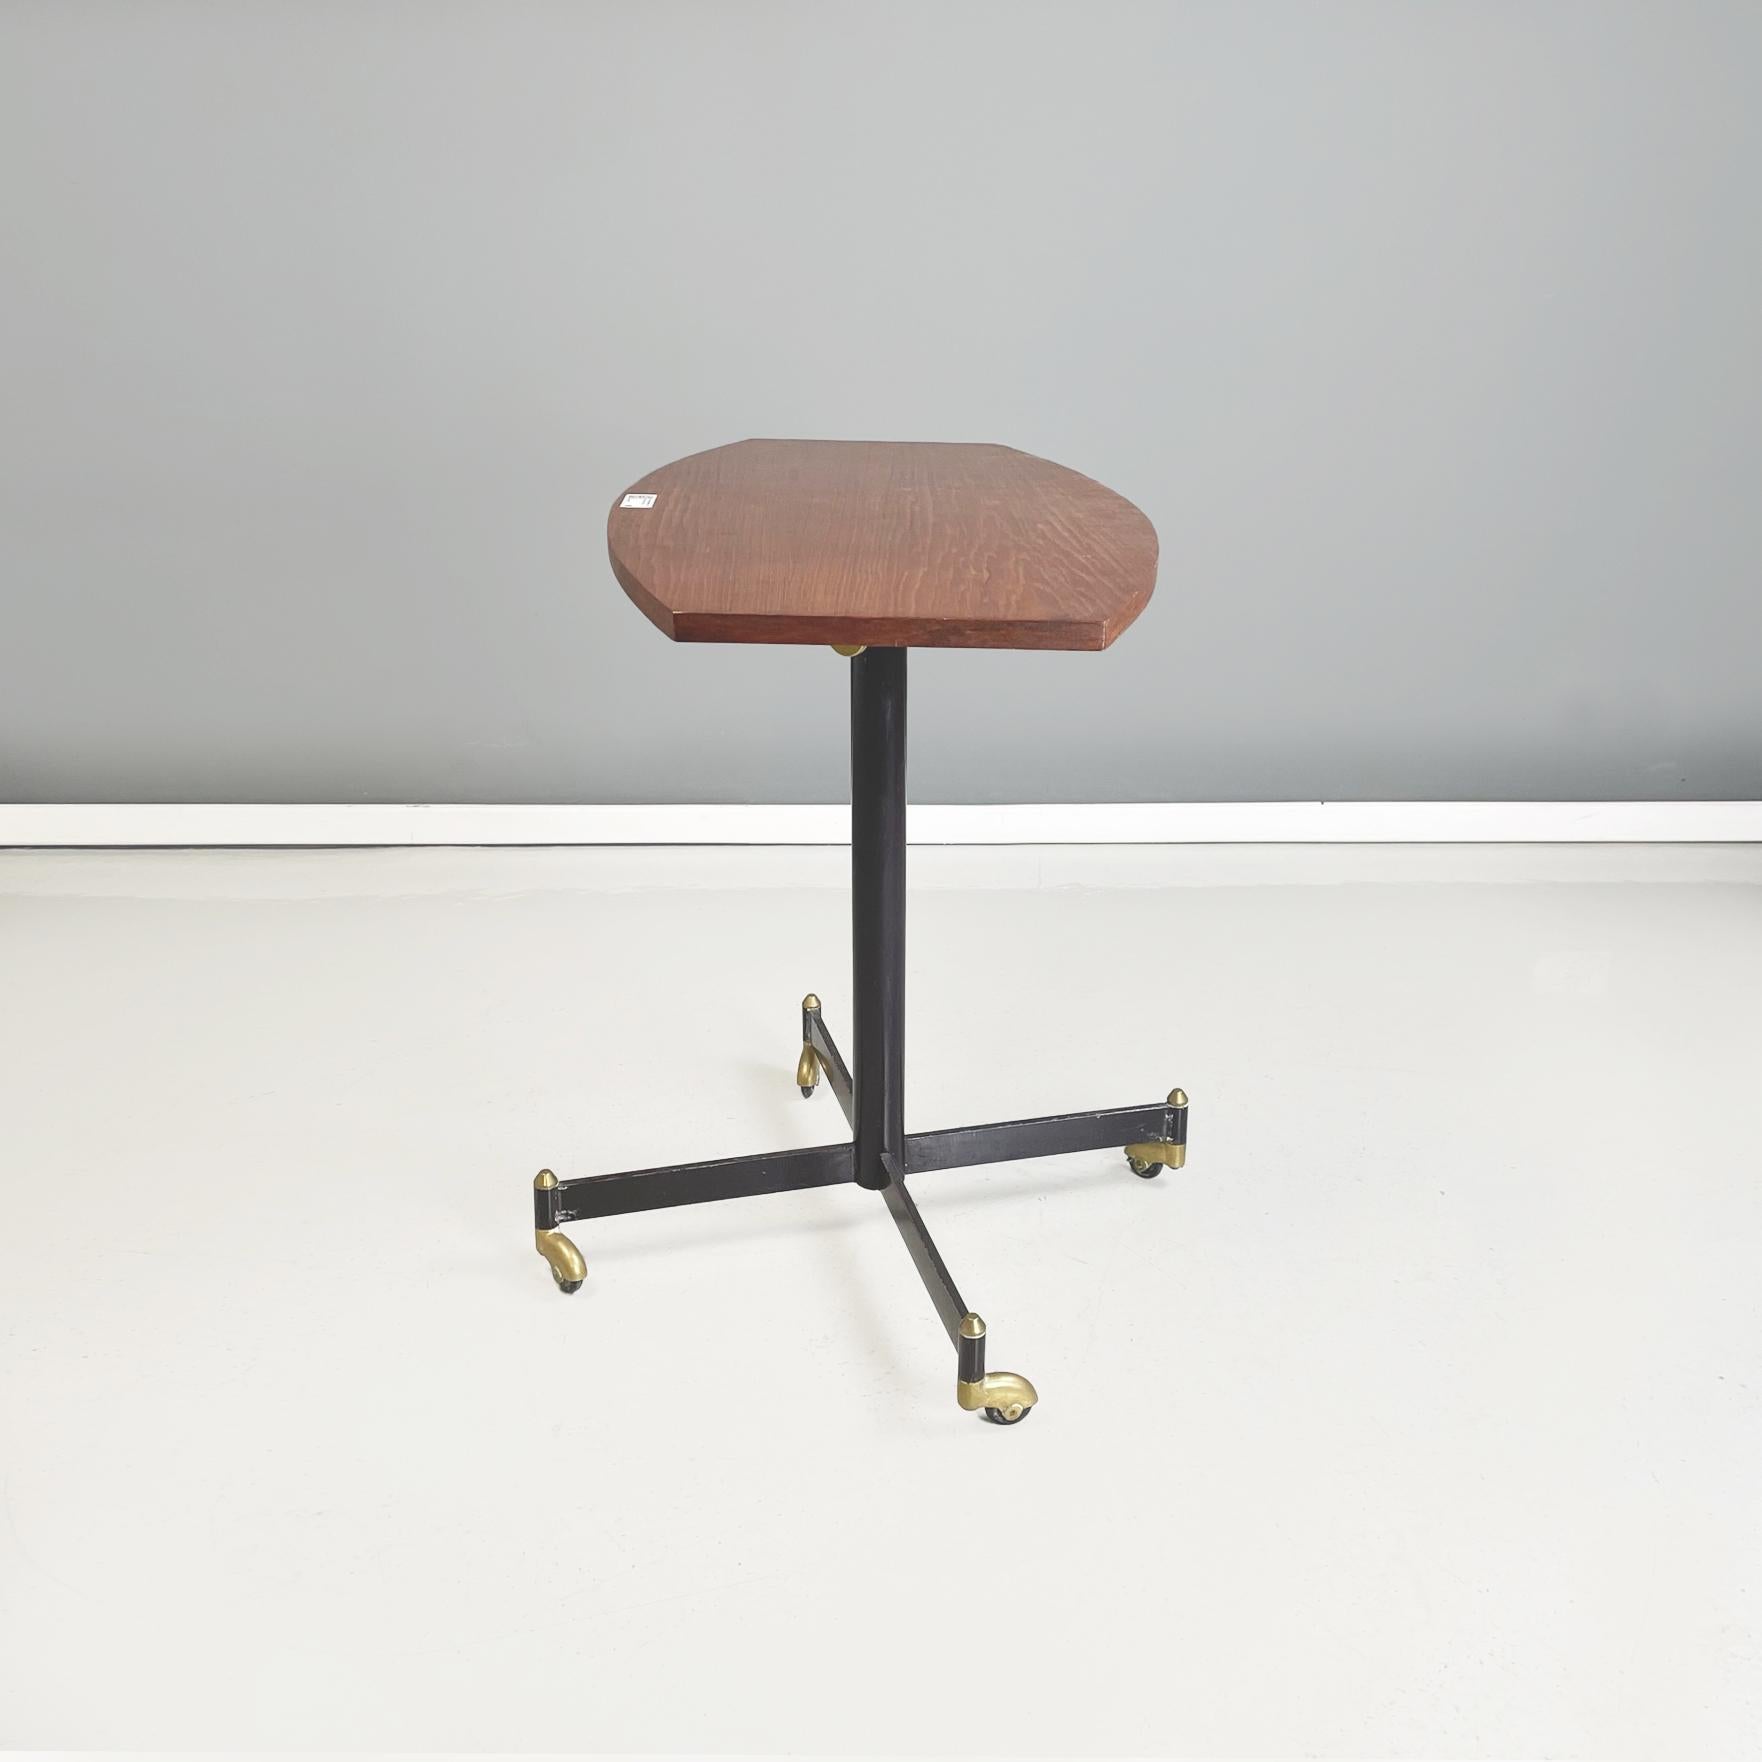 Mid-20th Century Italian Midcentury Table with Adjustable Wooden Top Withe Metal and Brass, 1950s For Sale